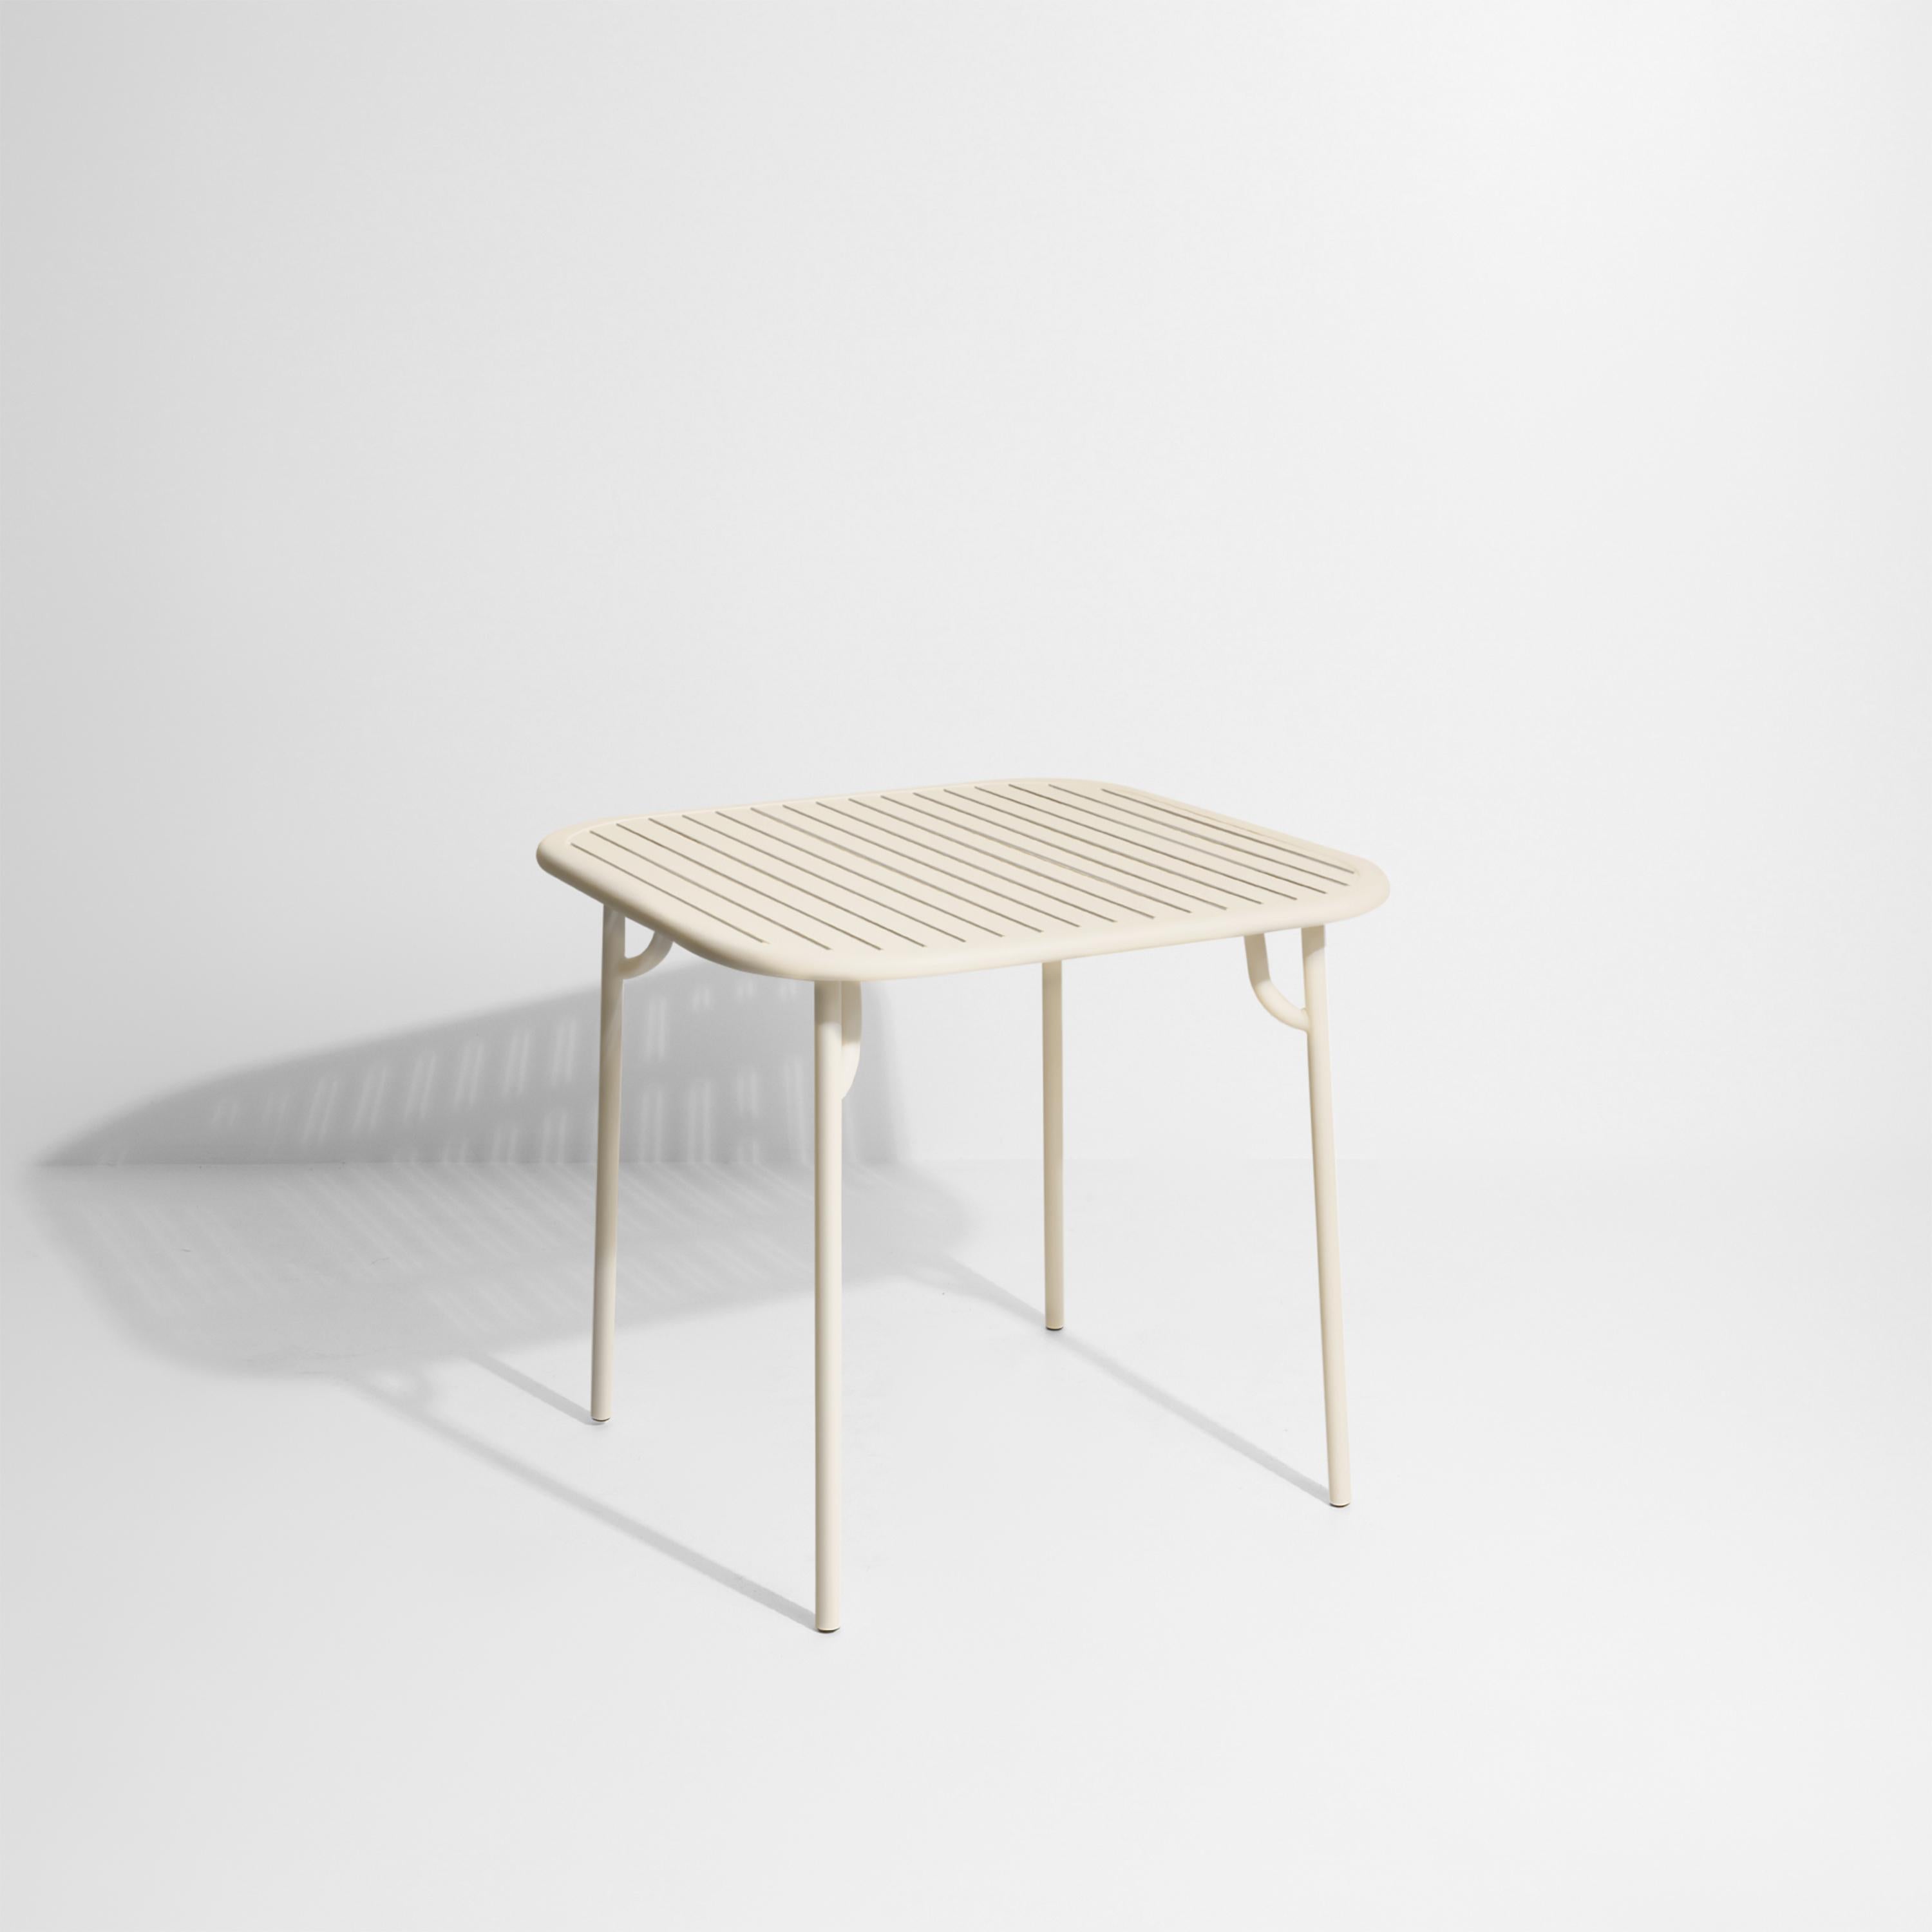 Petite Friture Week-End Square Dining Table in Ivory Aluminium with Slats by Studio BrichetZiegler, 2017

The week-end collection is a full range of outdoor furniture, in aluminium grained epoxy paint, matt finish, that includes 18 functions and 8